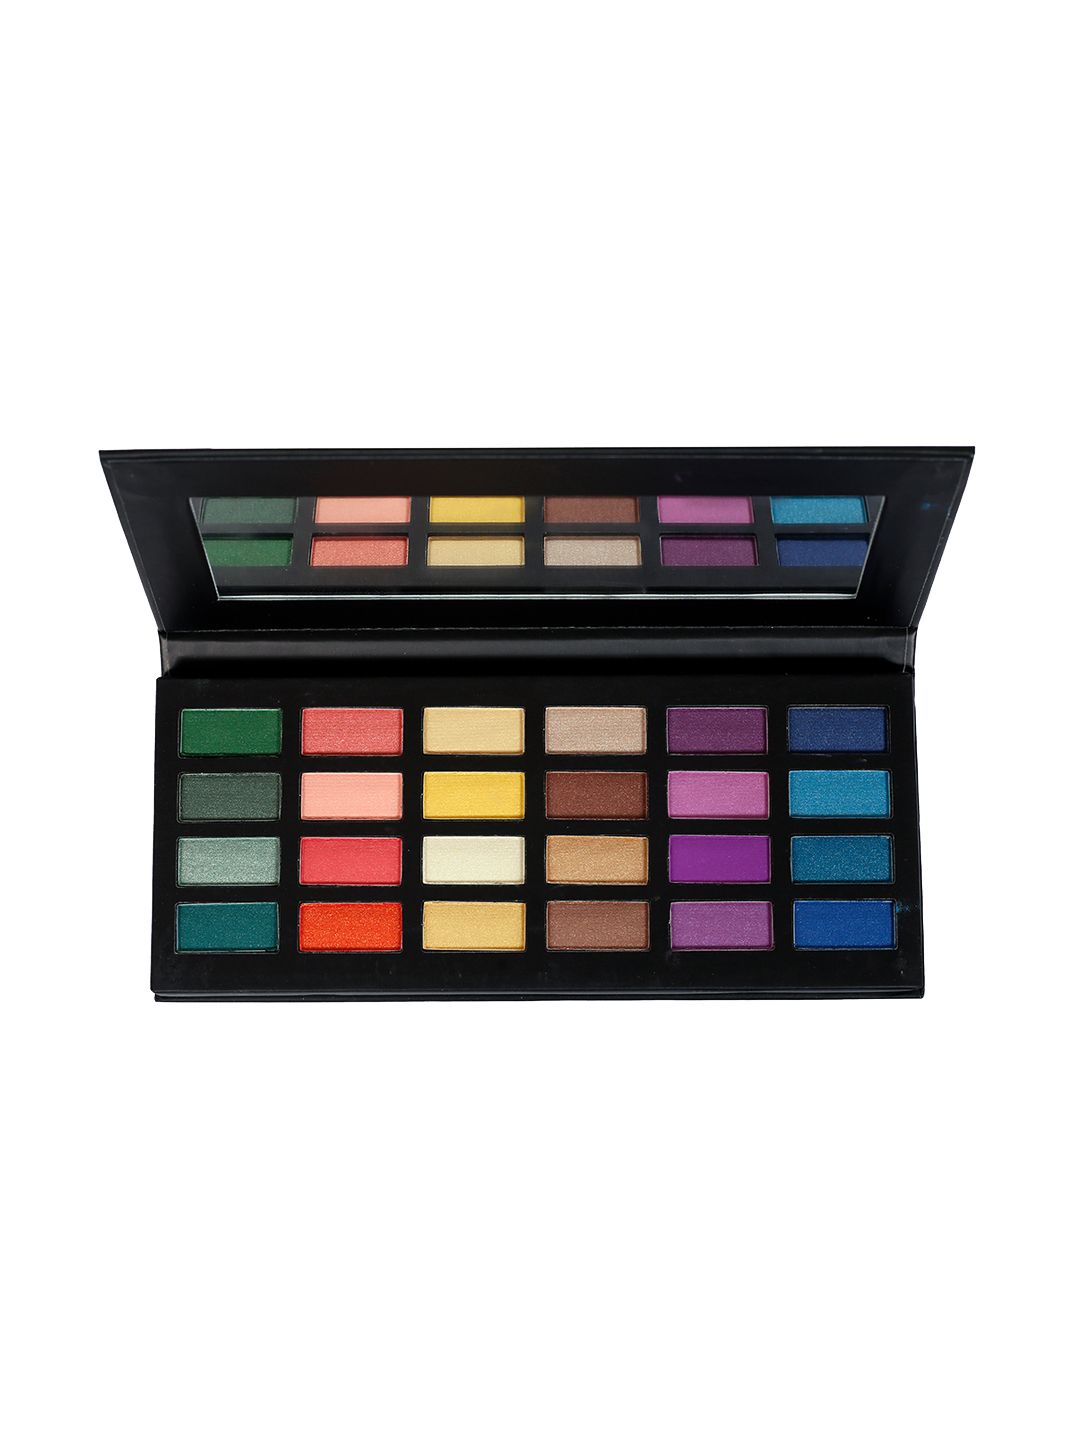 INCOLOR Dare To Nude 24 In 1 Eyeshadow Palette 18 g 01 Price in India